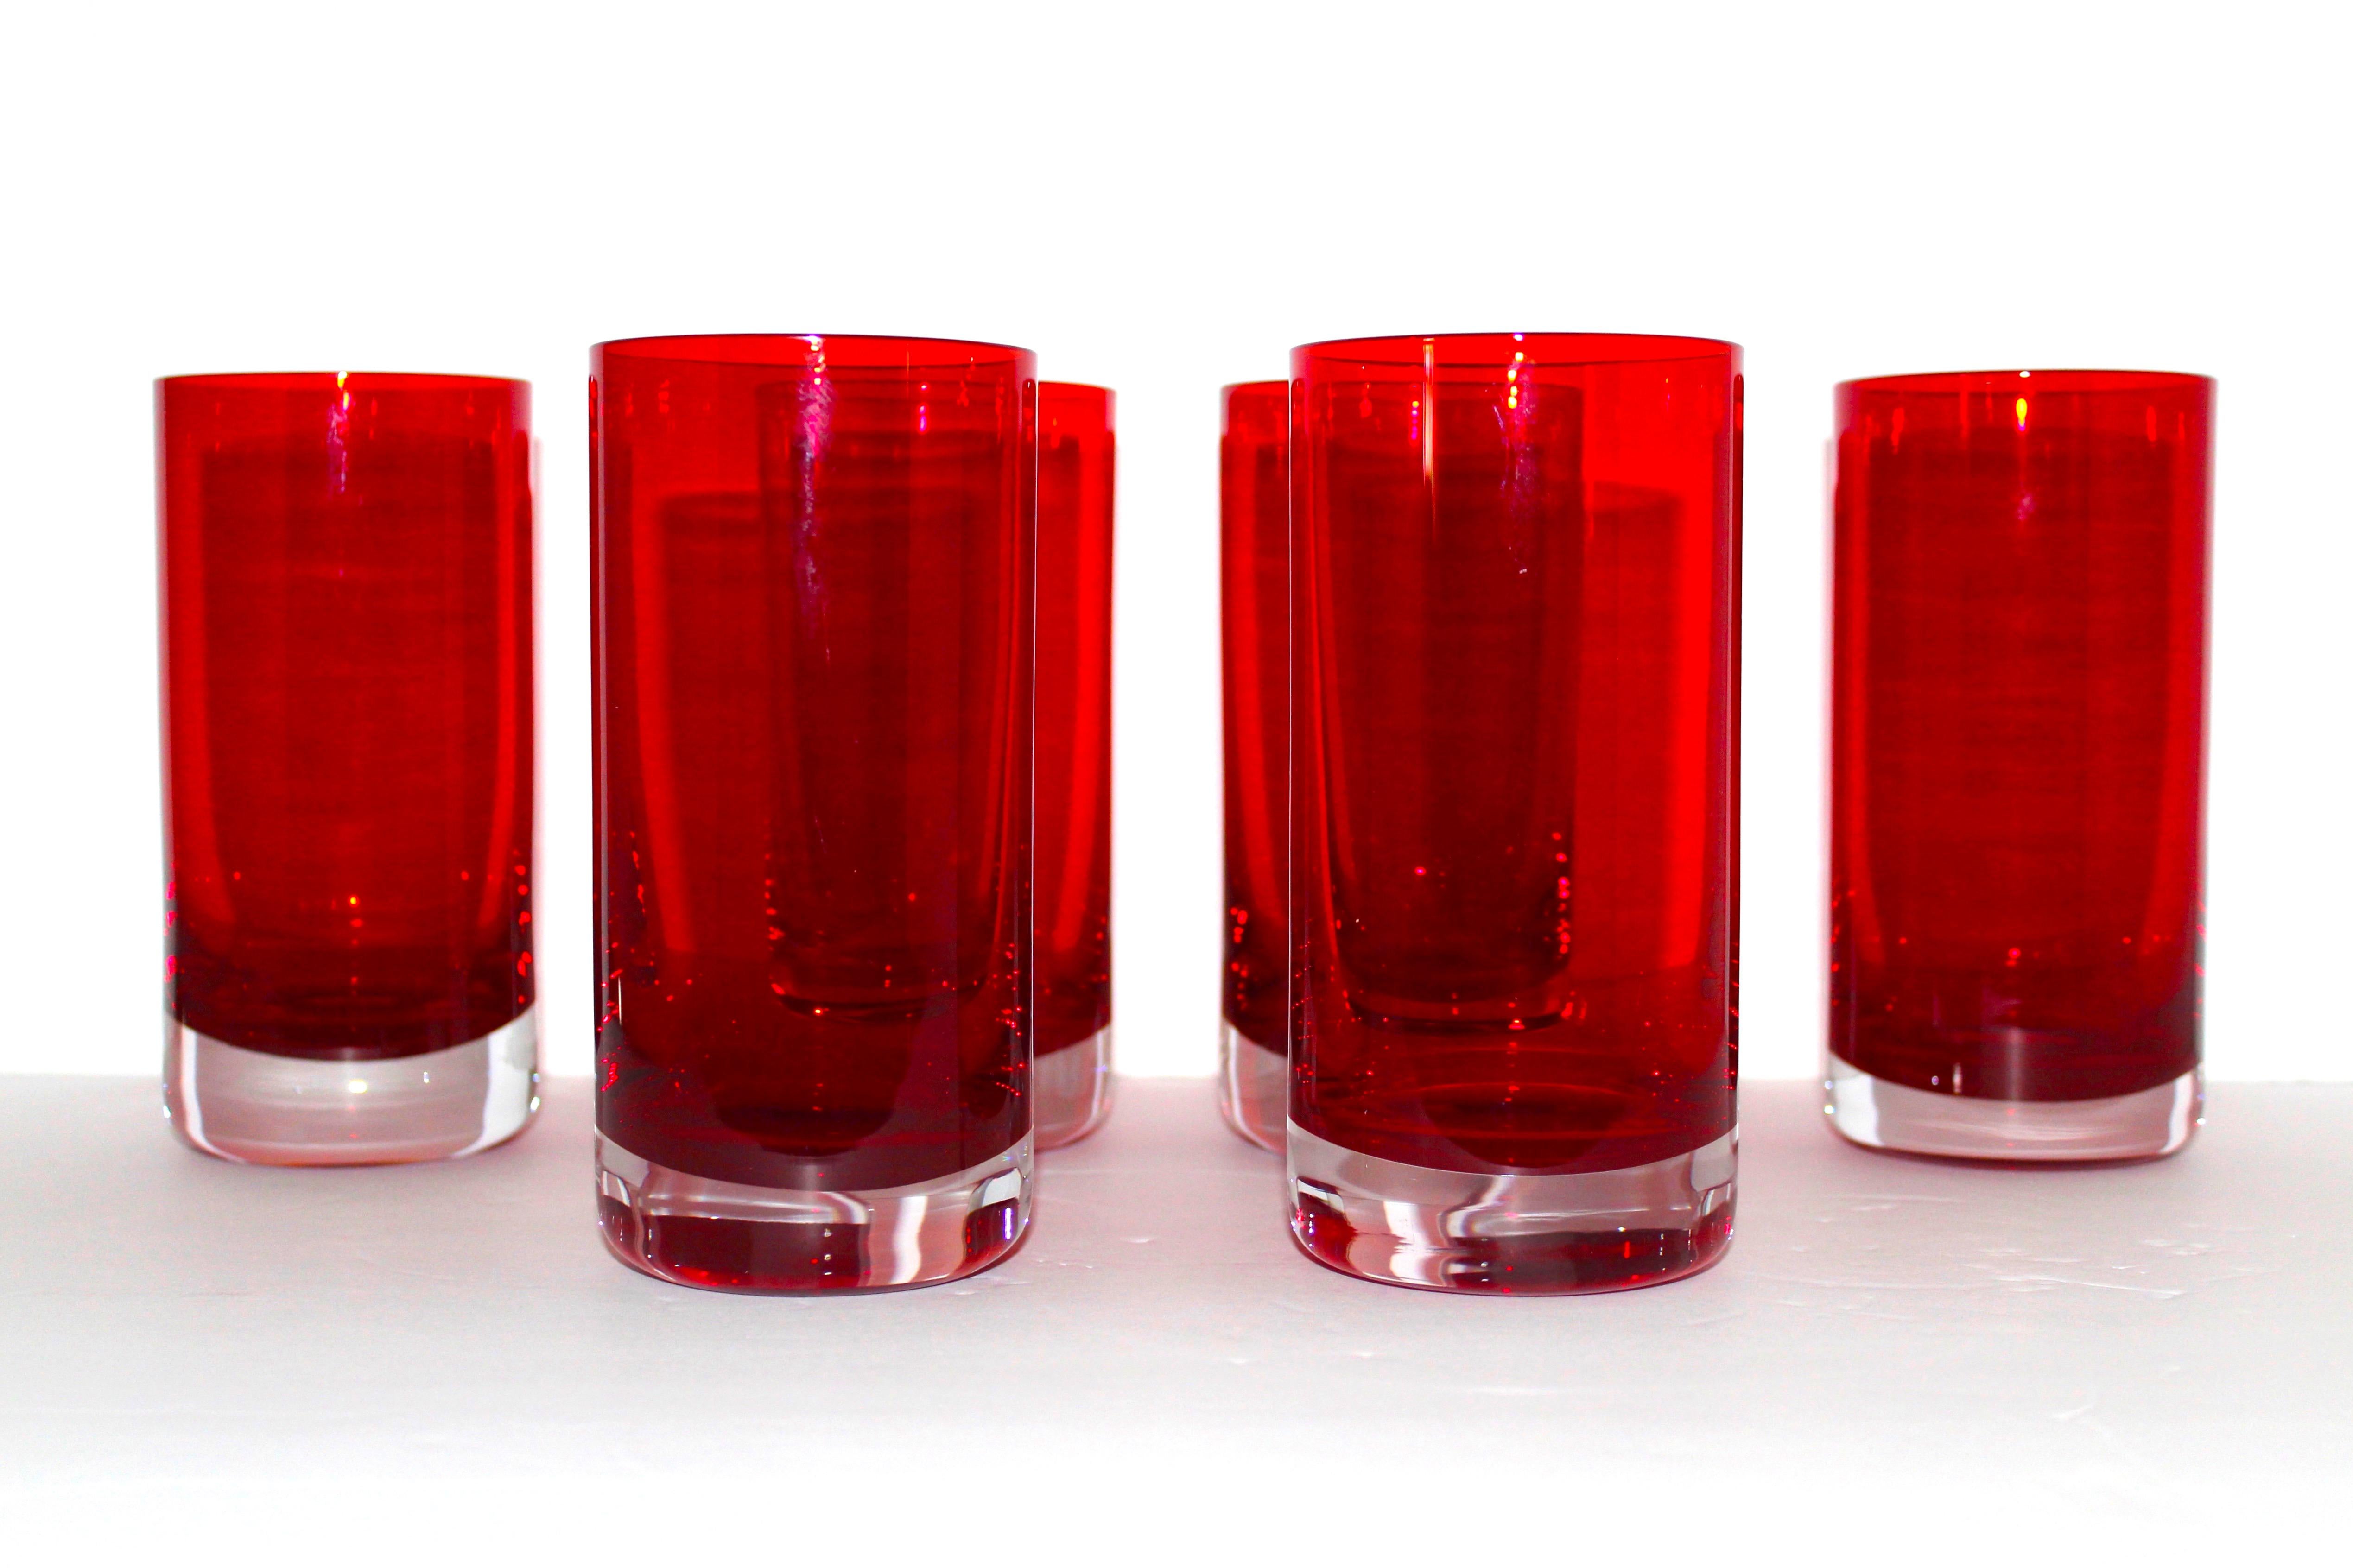 Set of six Mid-Century Modern hand blown Murano highball glasses. Sommerso cased glass design in garnet red over clear glass. Exquisite design in heavy weight glass. Makes a chic addition to any barware or tableware set.